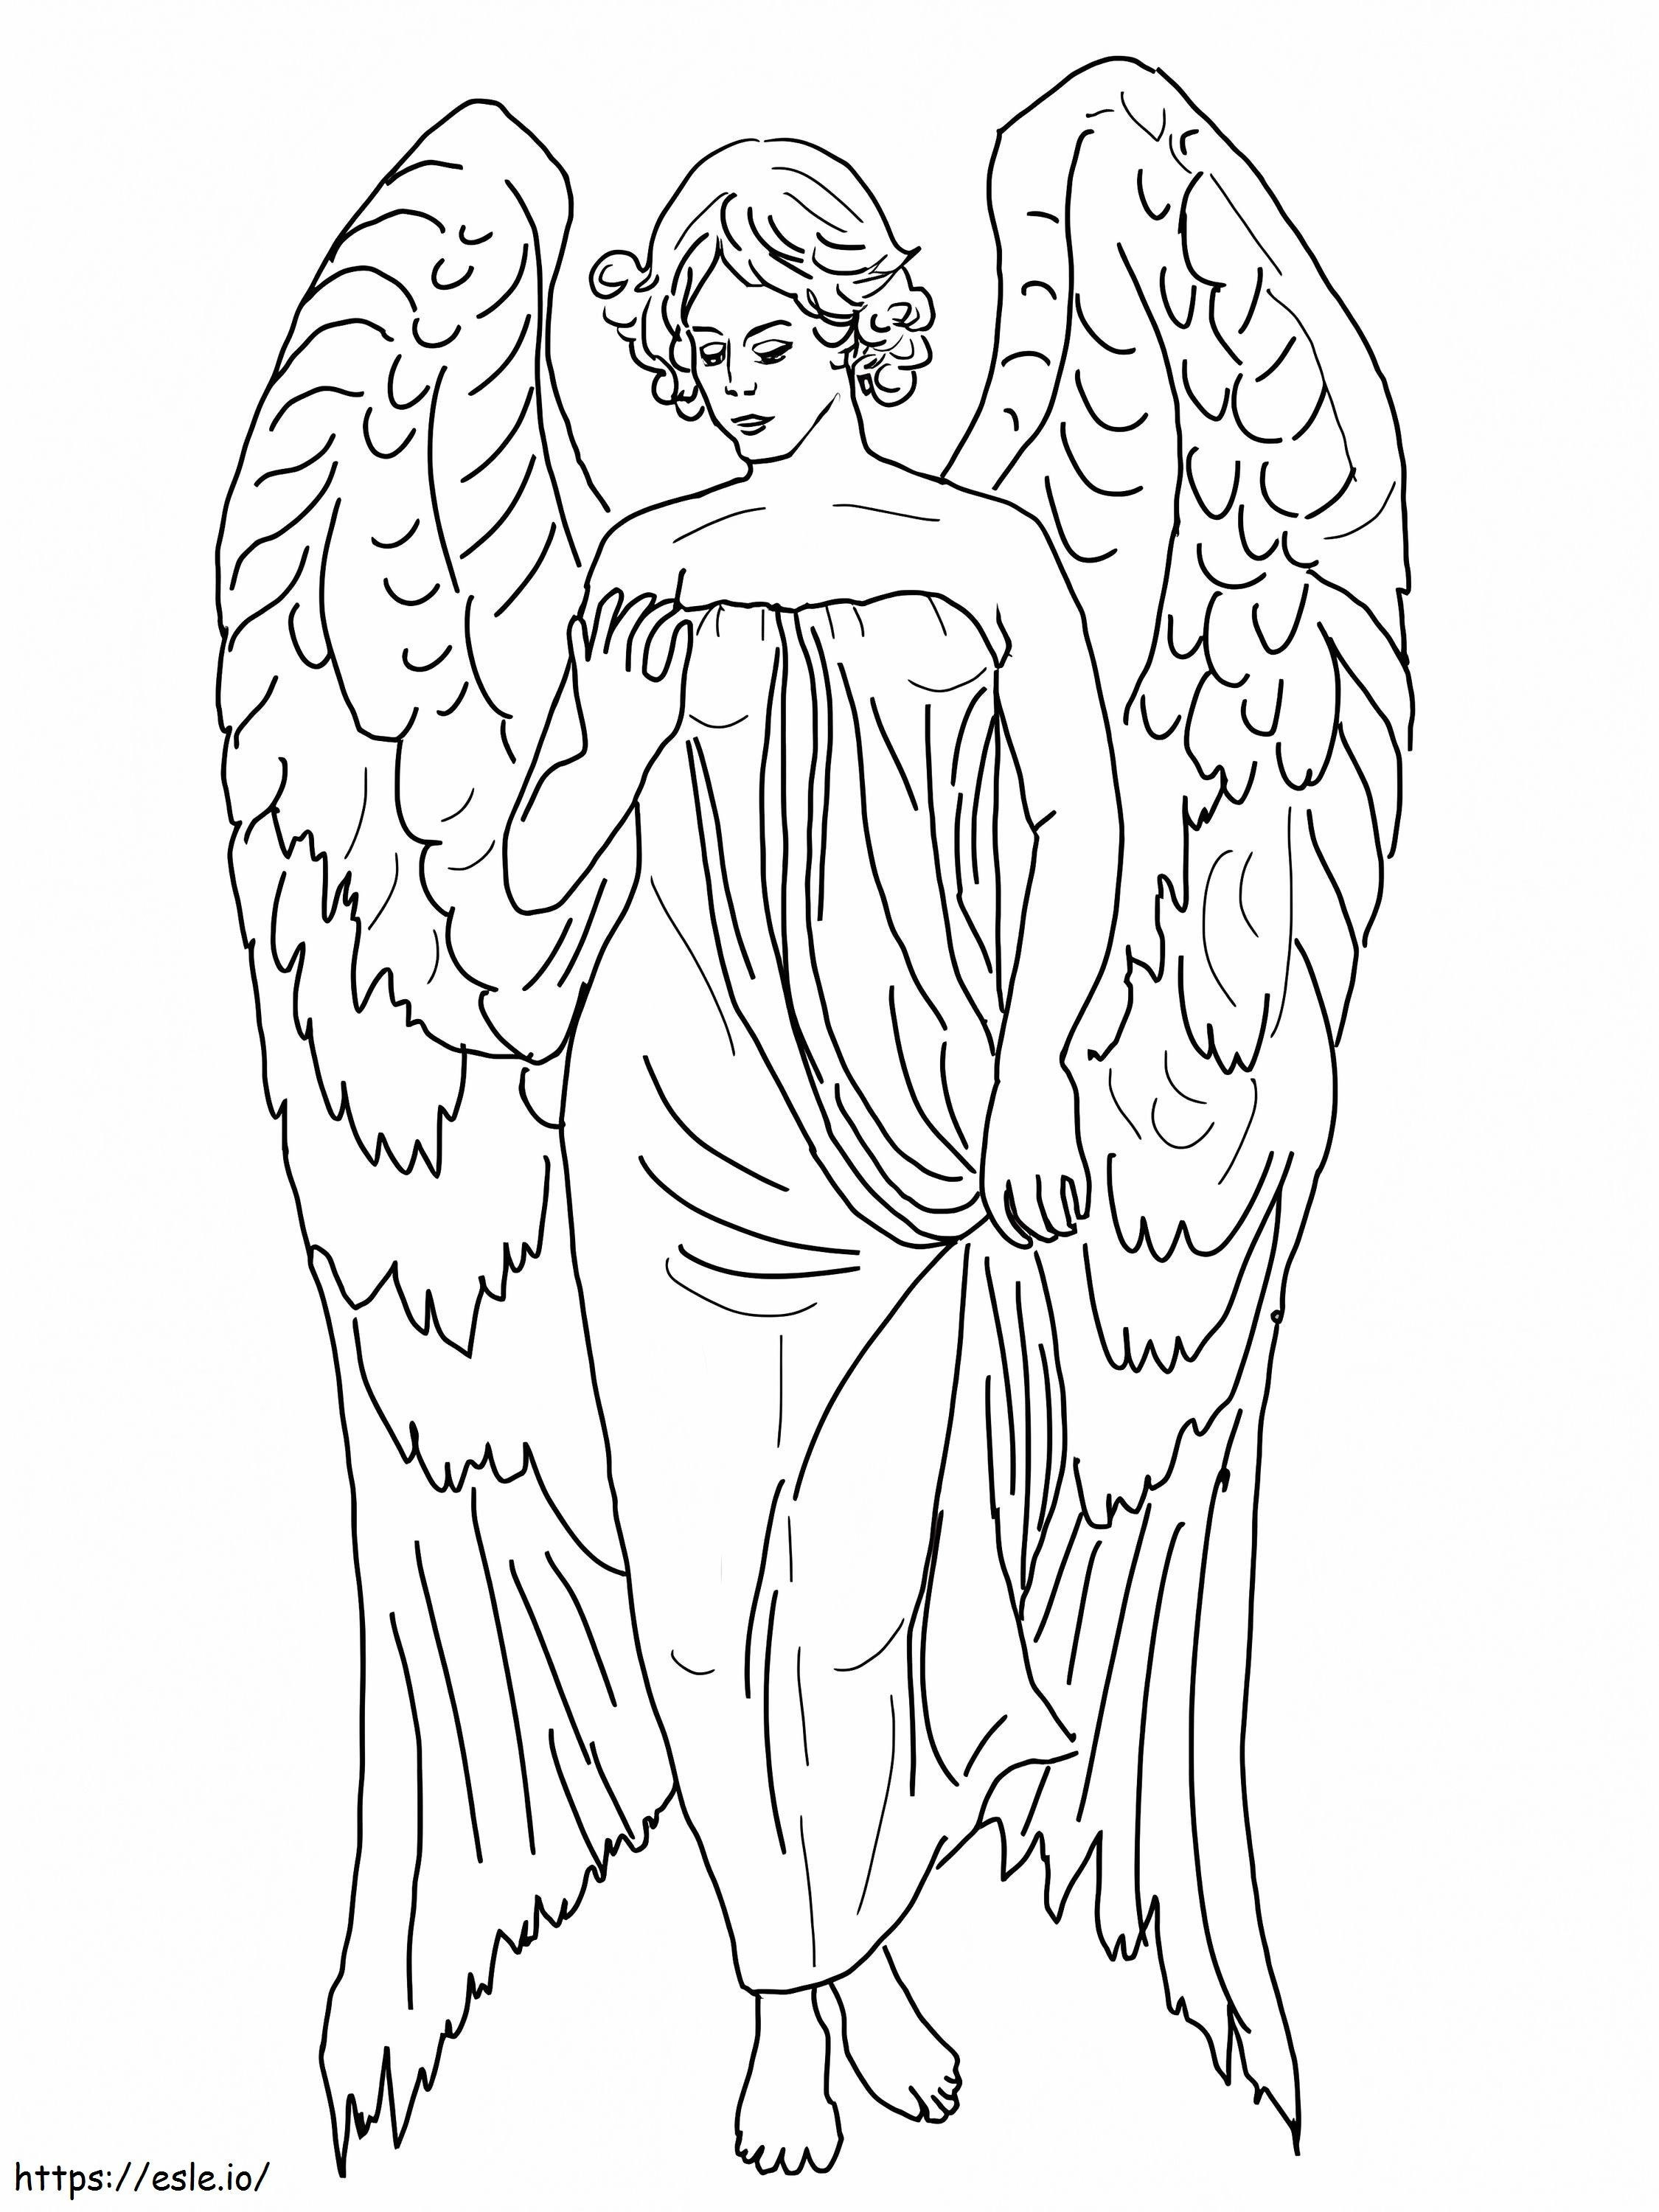 Guardian Angel coloring page